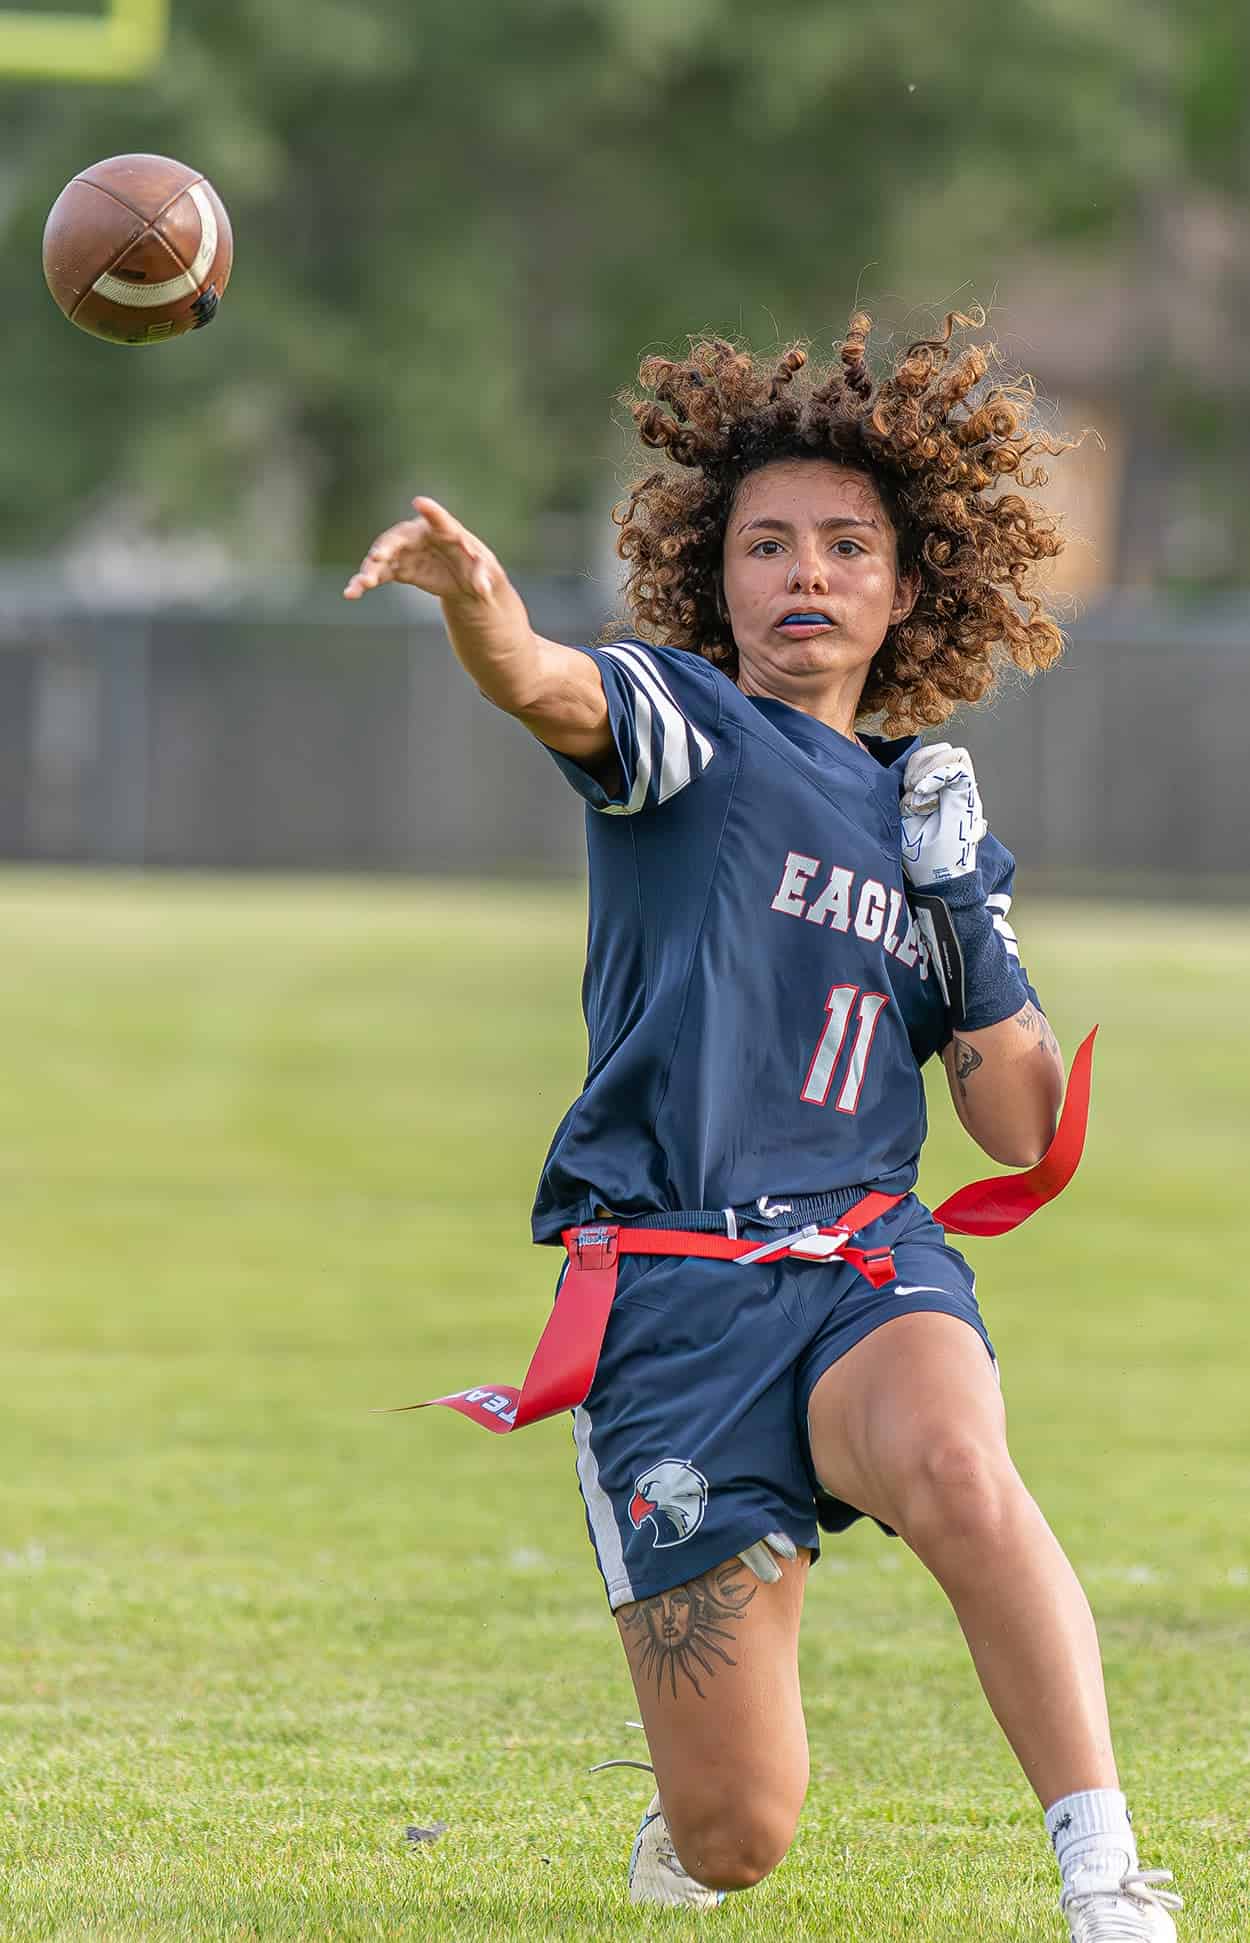 Springstead High, 11, Samantha Suarez launches a pass in the Eagles 36-0 win at home over visiting Countryside High in a 2A District 14 playoff match. Photo by [Joseph Dicristofalo]